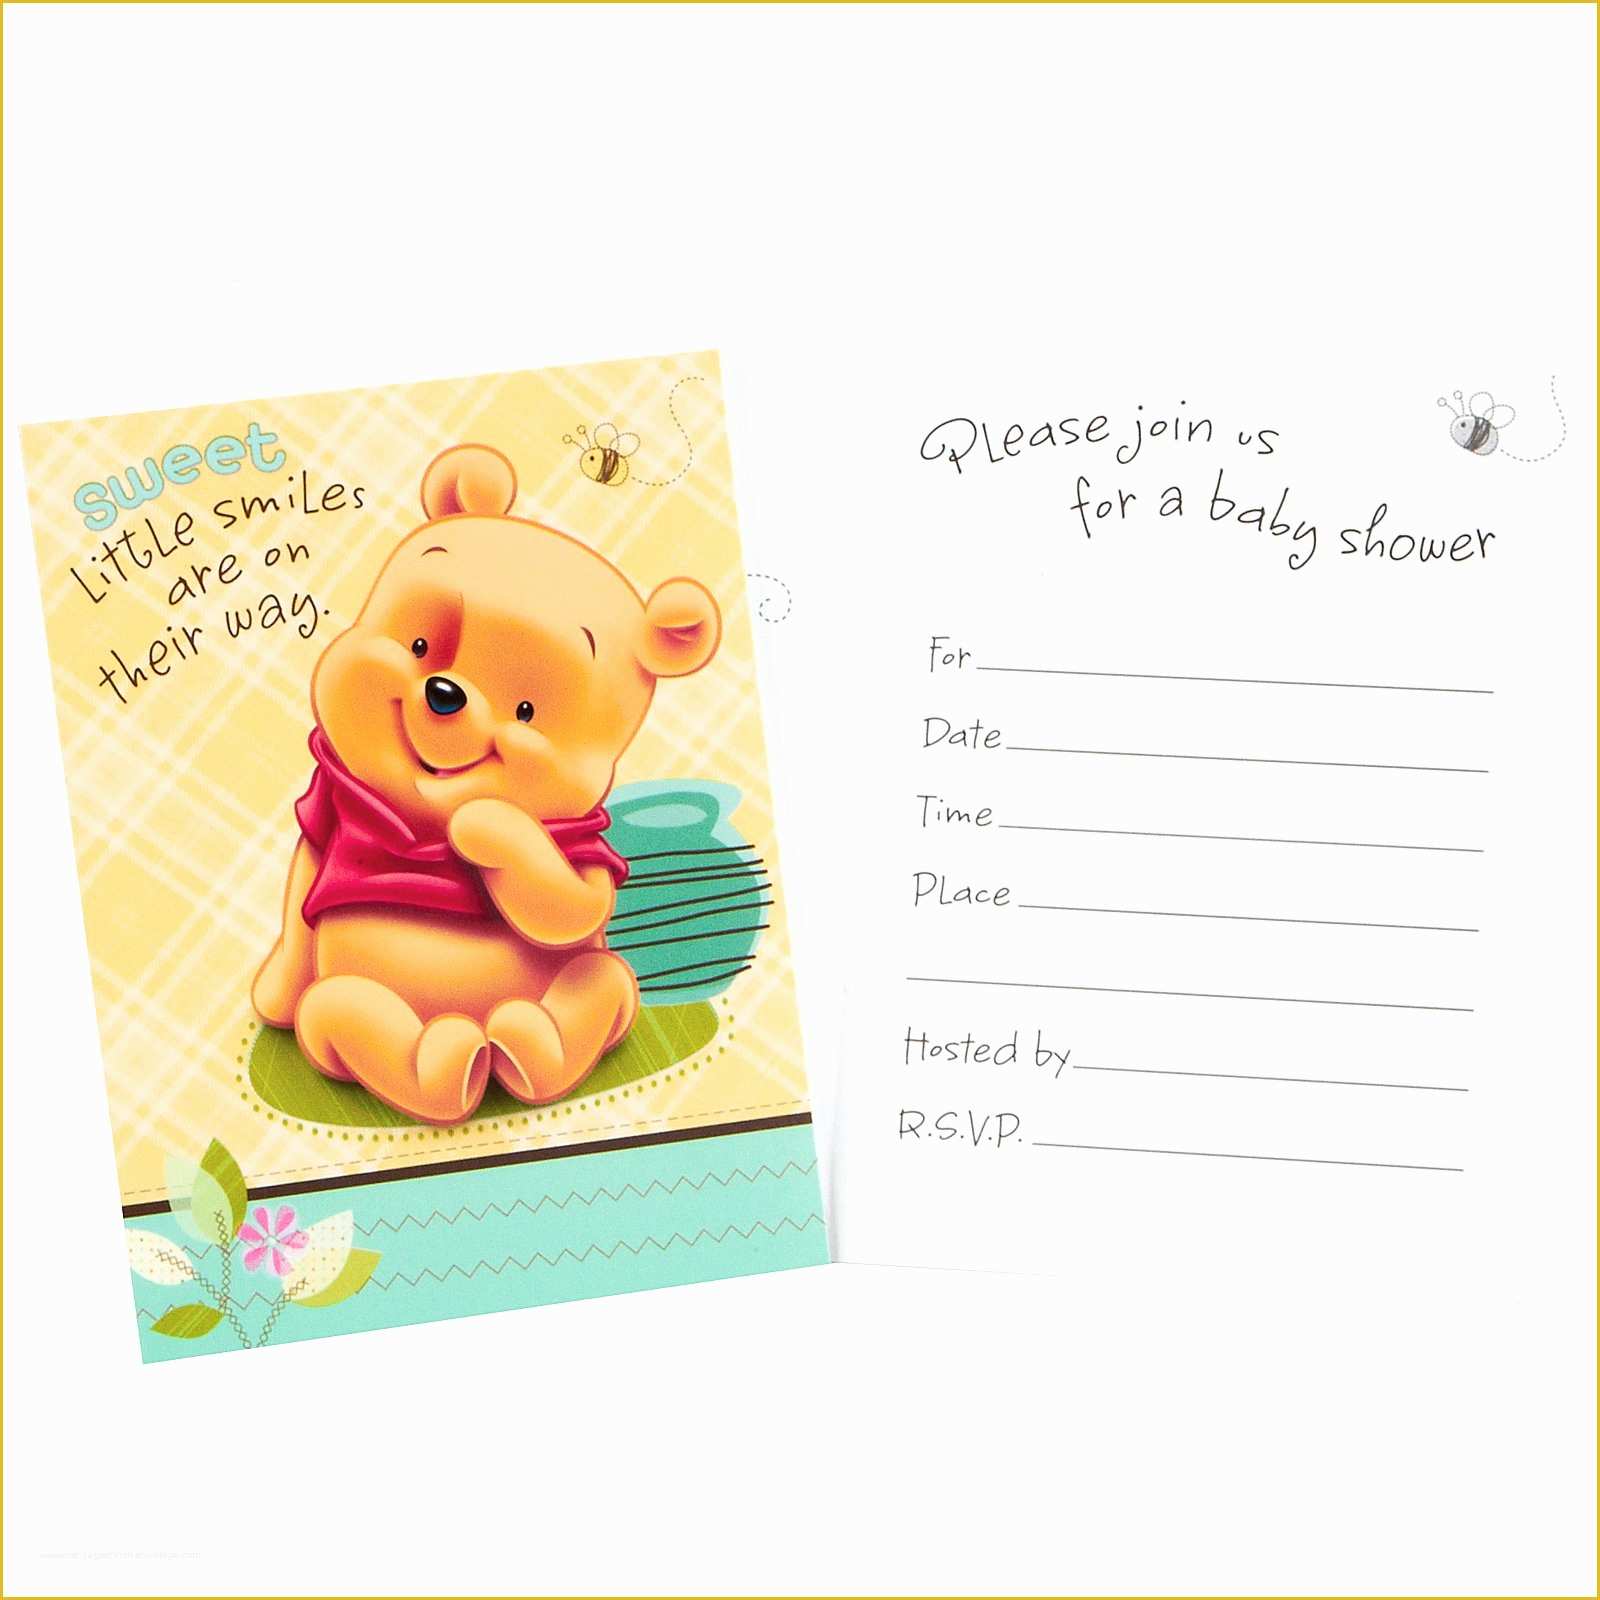 Free Disney Baby Shower Invitation Templates Of Winnie the Pooh Design for Your Baby Shower Invitations